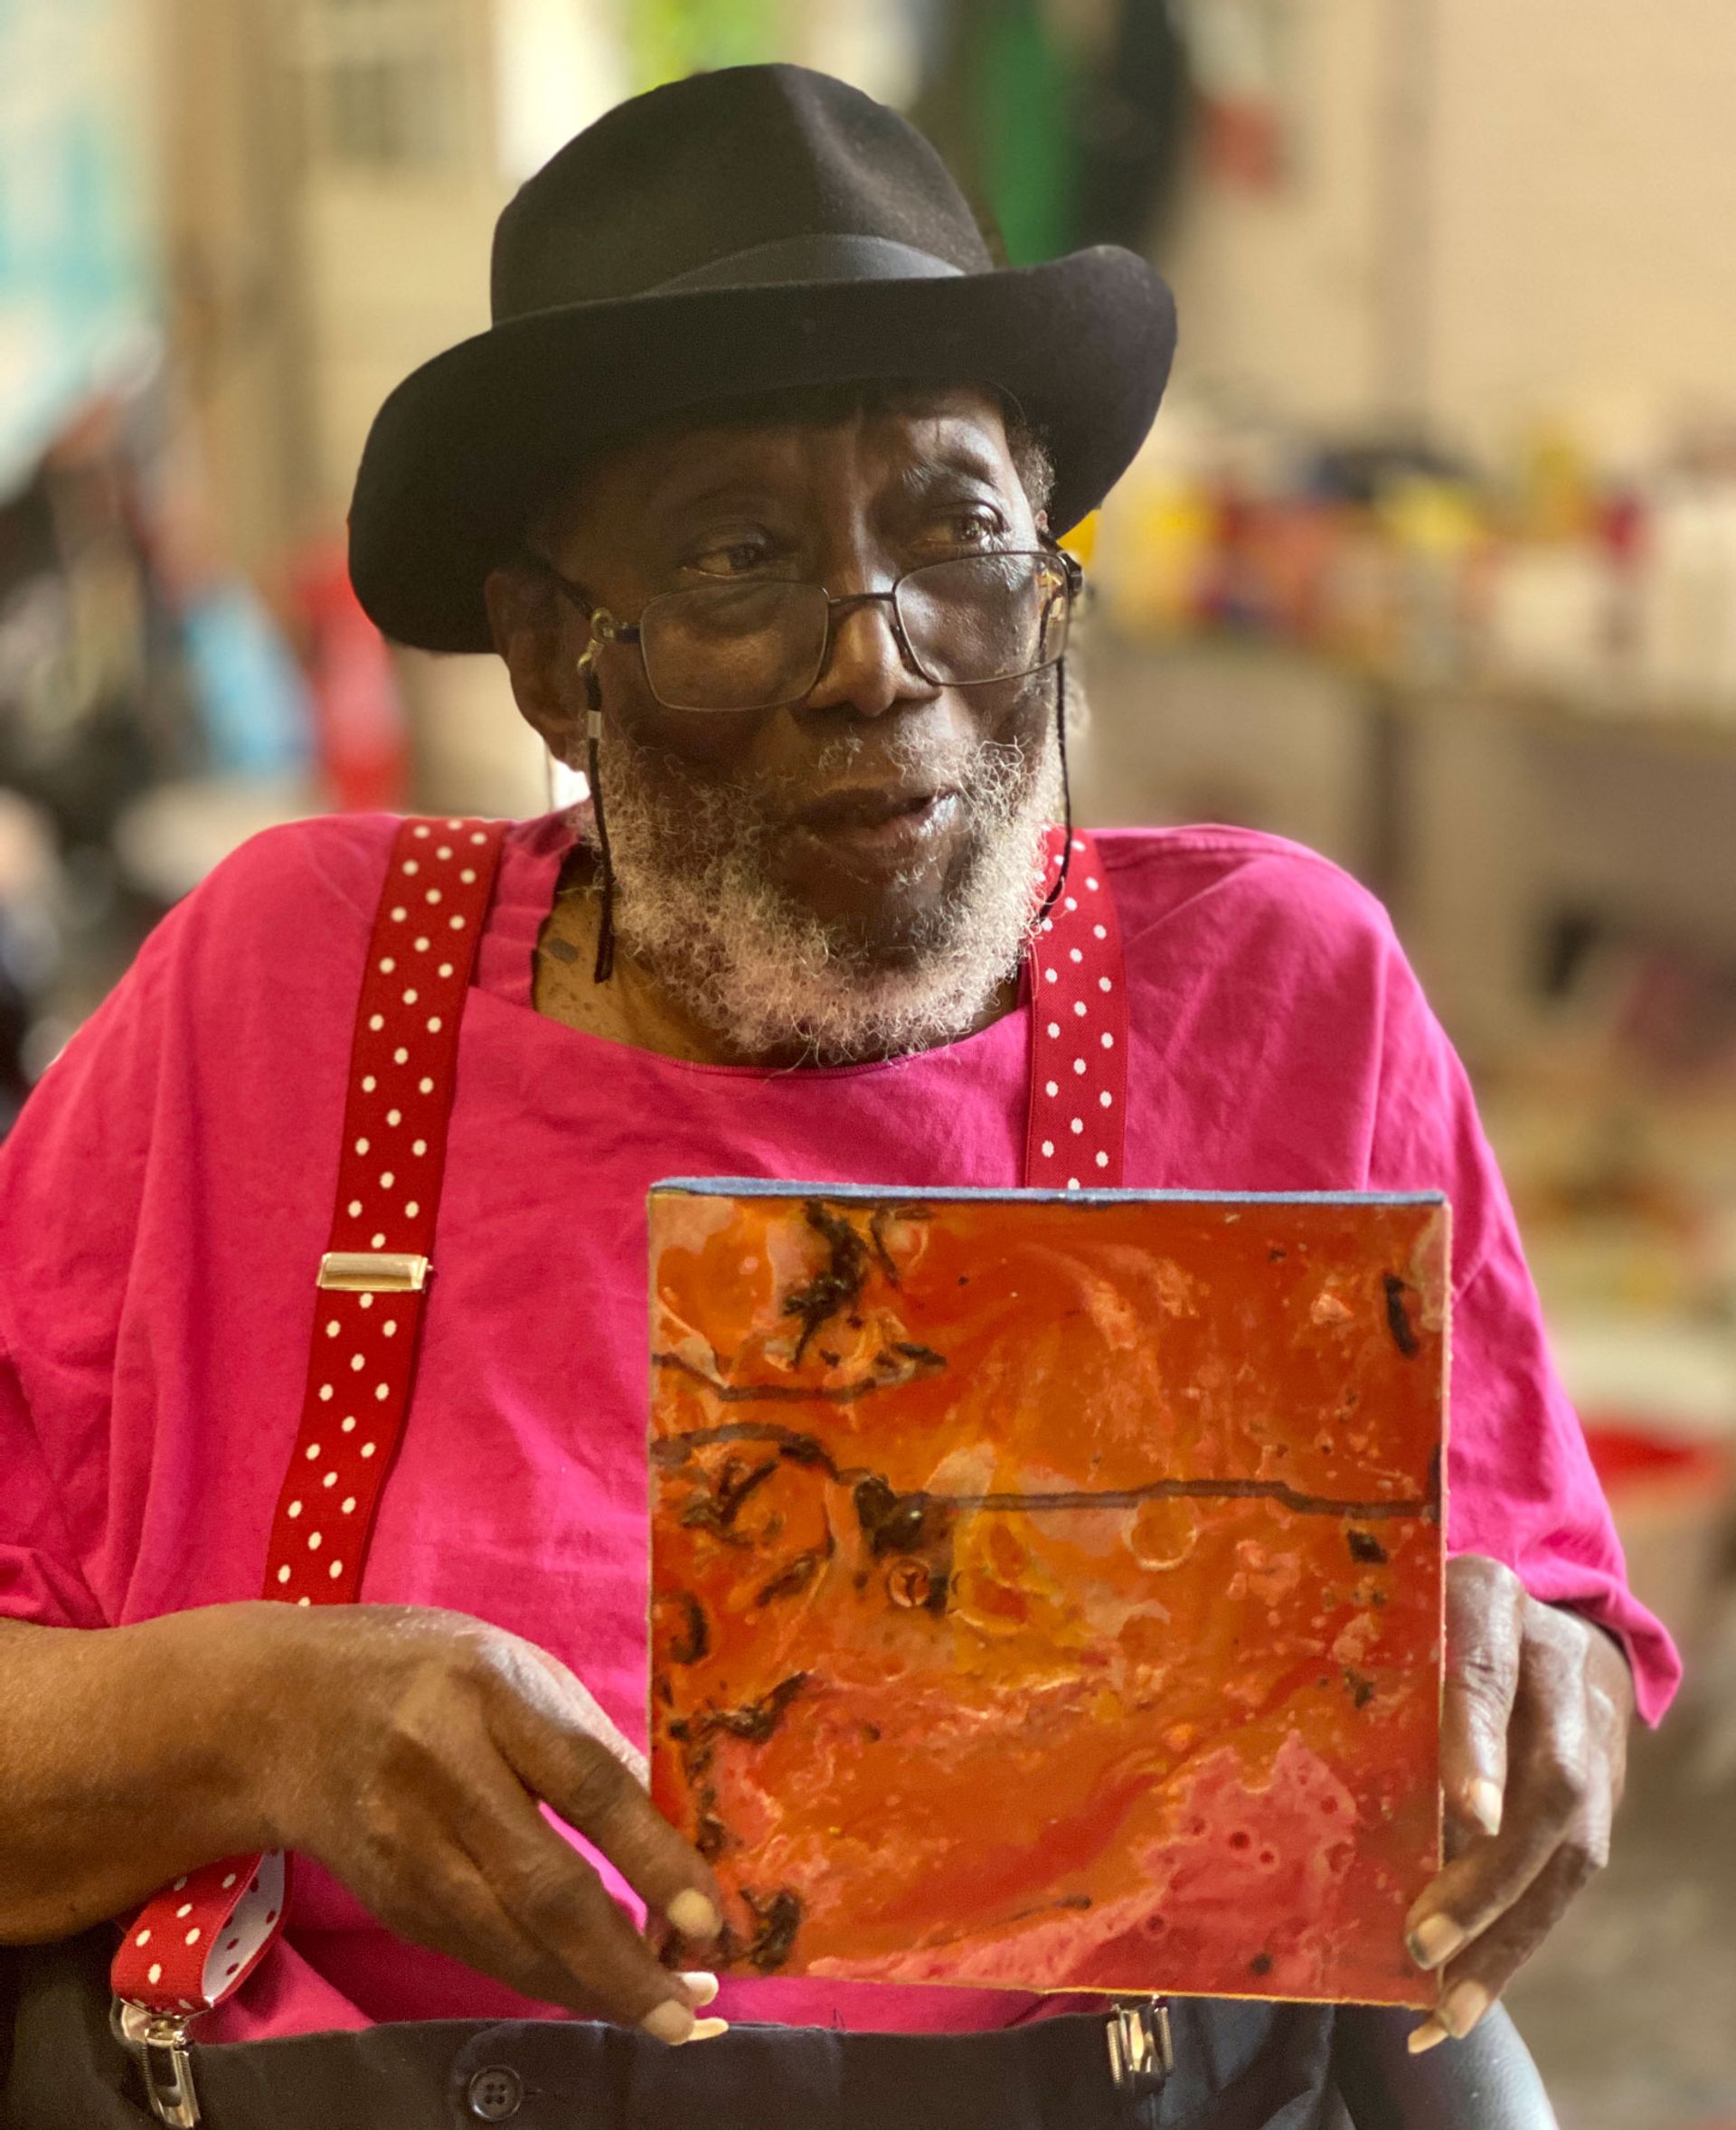 Frank Bowling with his acrylic gel work, Lying Down One, for sale as part of the fourth edition of Cure3 to benefit Parkinson's research. Photo: Ben Bowling. Courtesy of Artwise